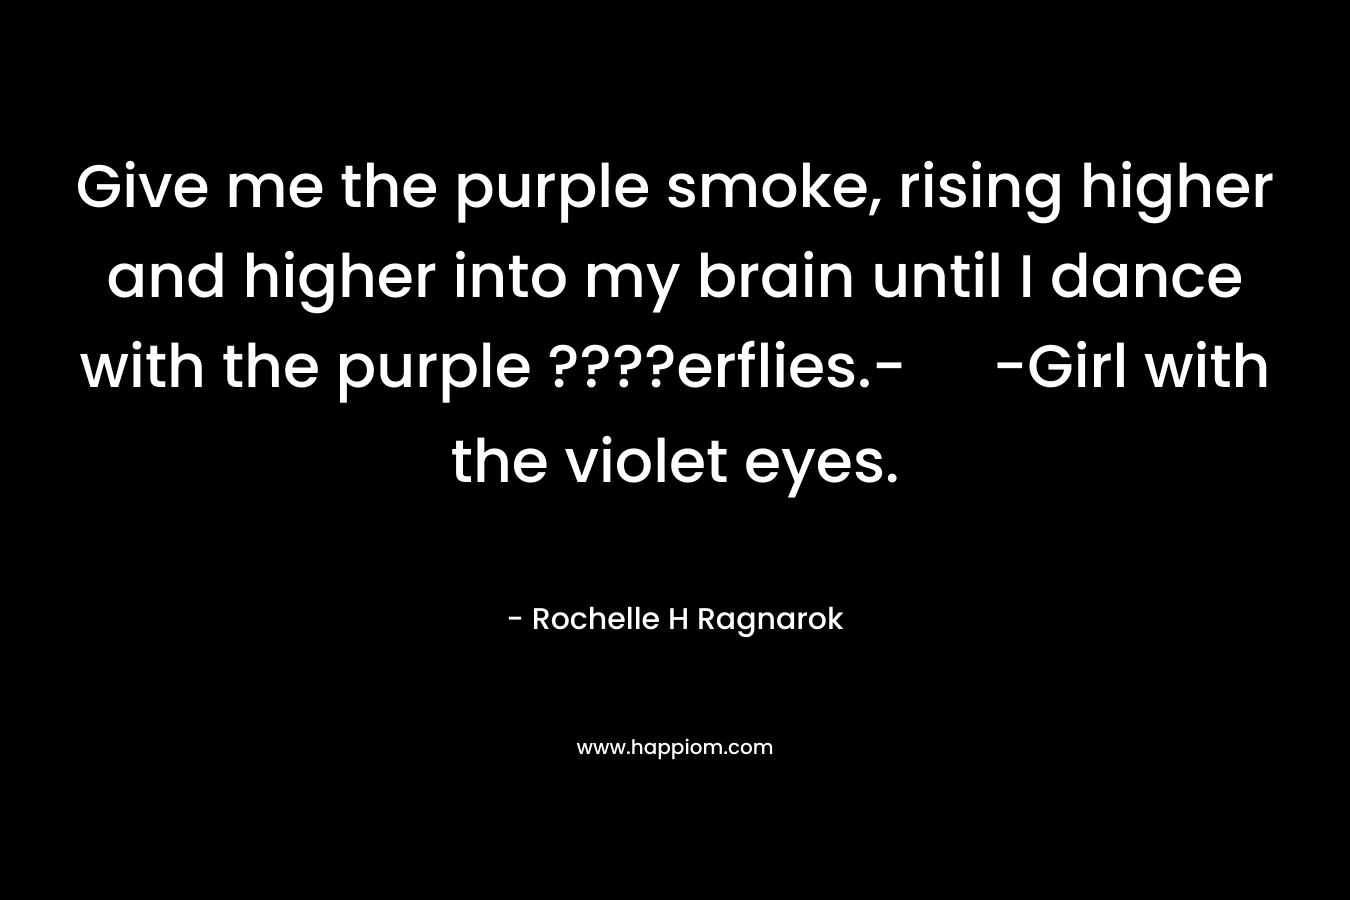 Give me the purple smoke, rising higher and higher into my brain until I dance with the purple ????erflies.- -Girl with the violet eyes. – Rochelle H Ragnarok